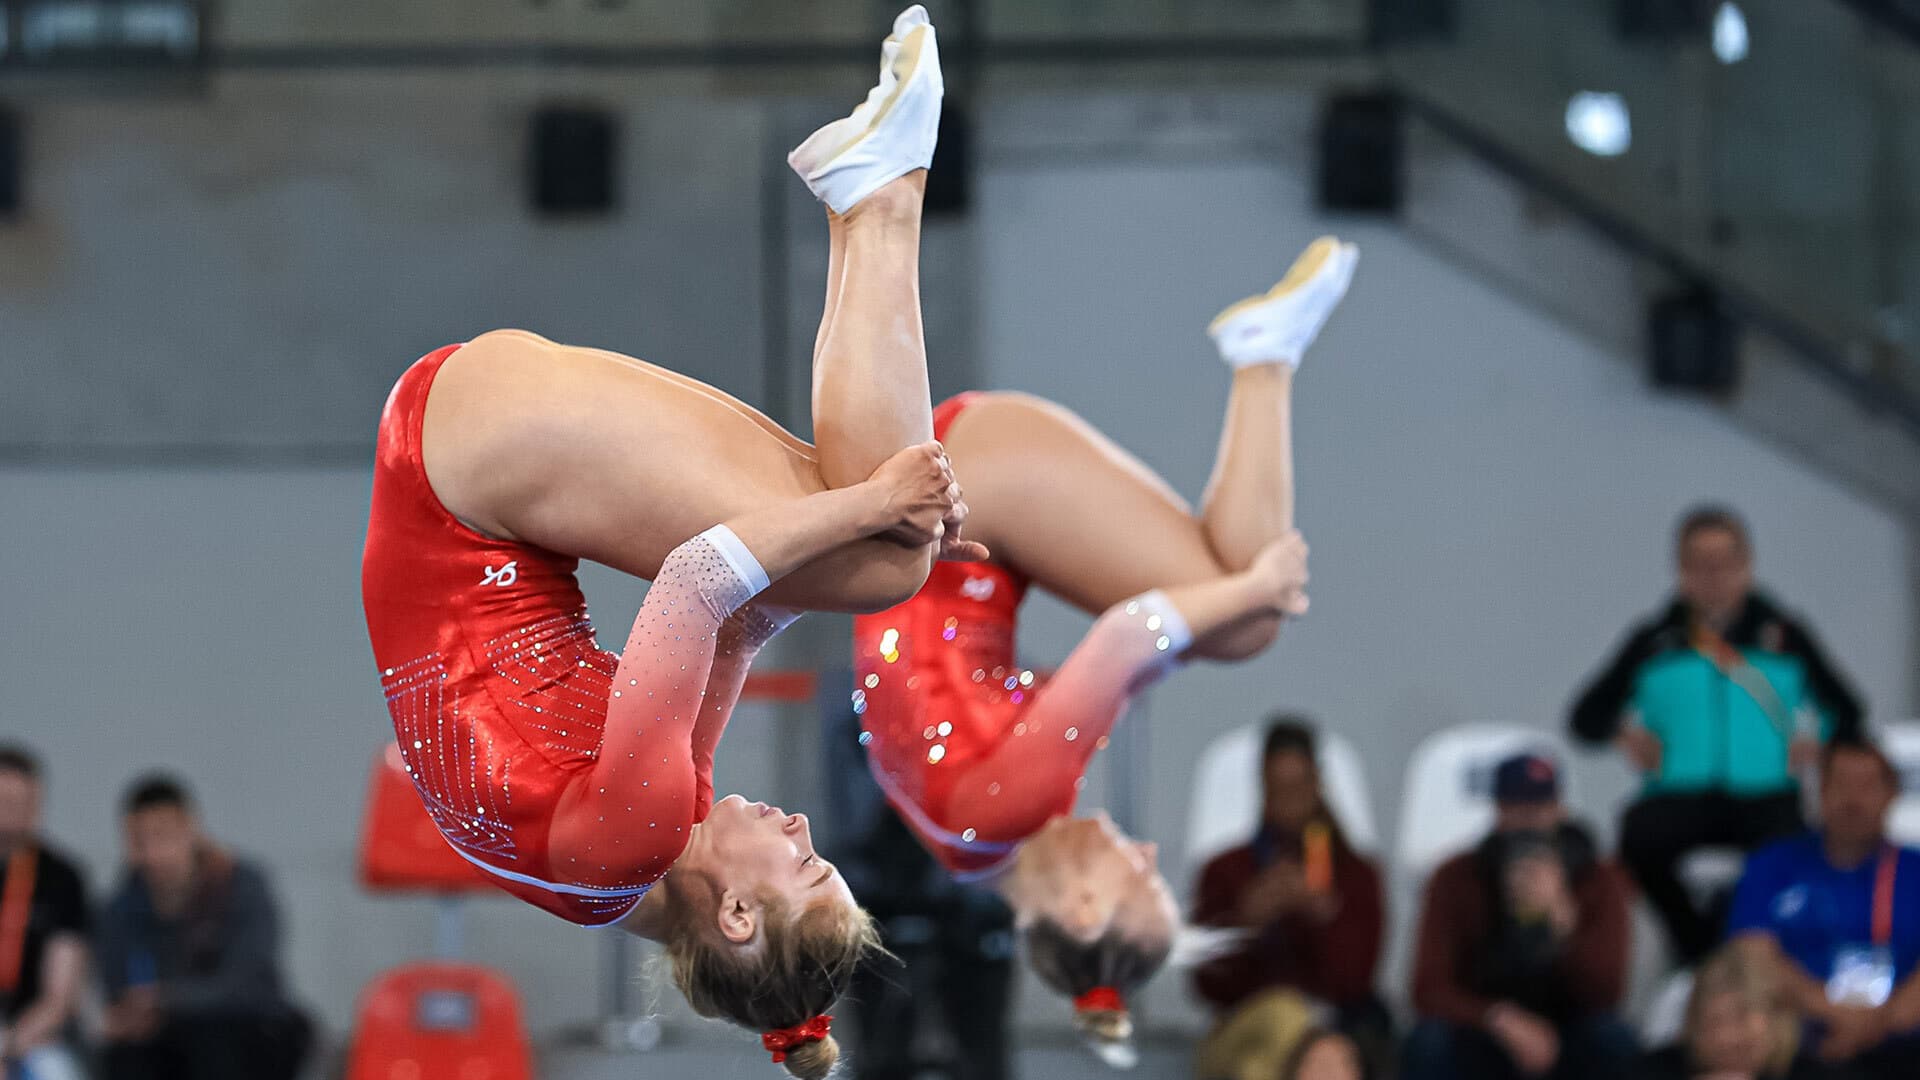 two female athletes flip through the air, upside-down in red leotards